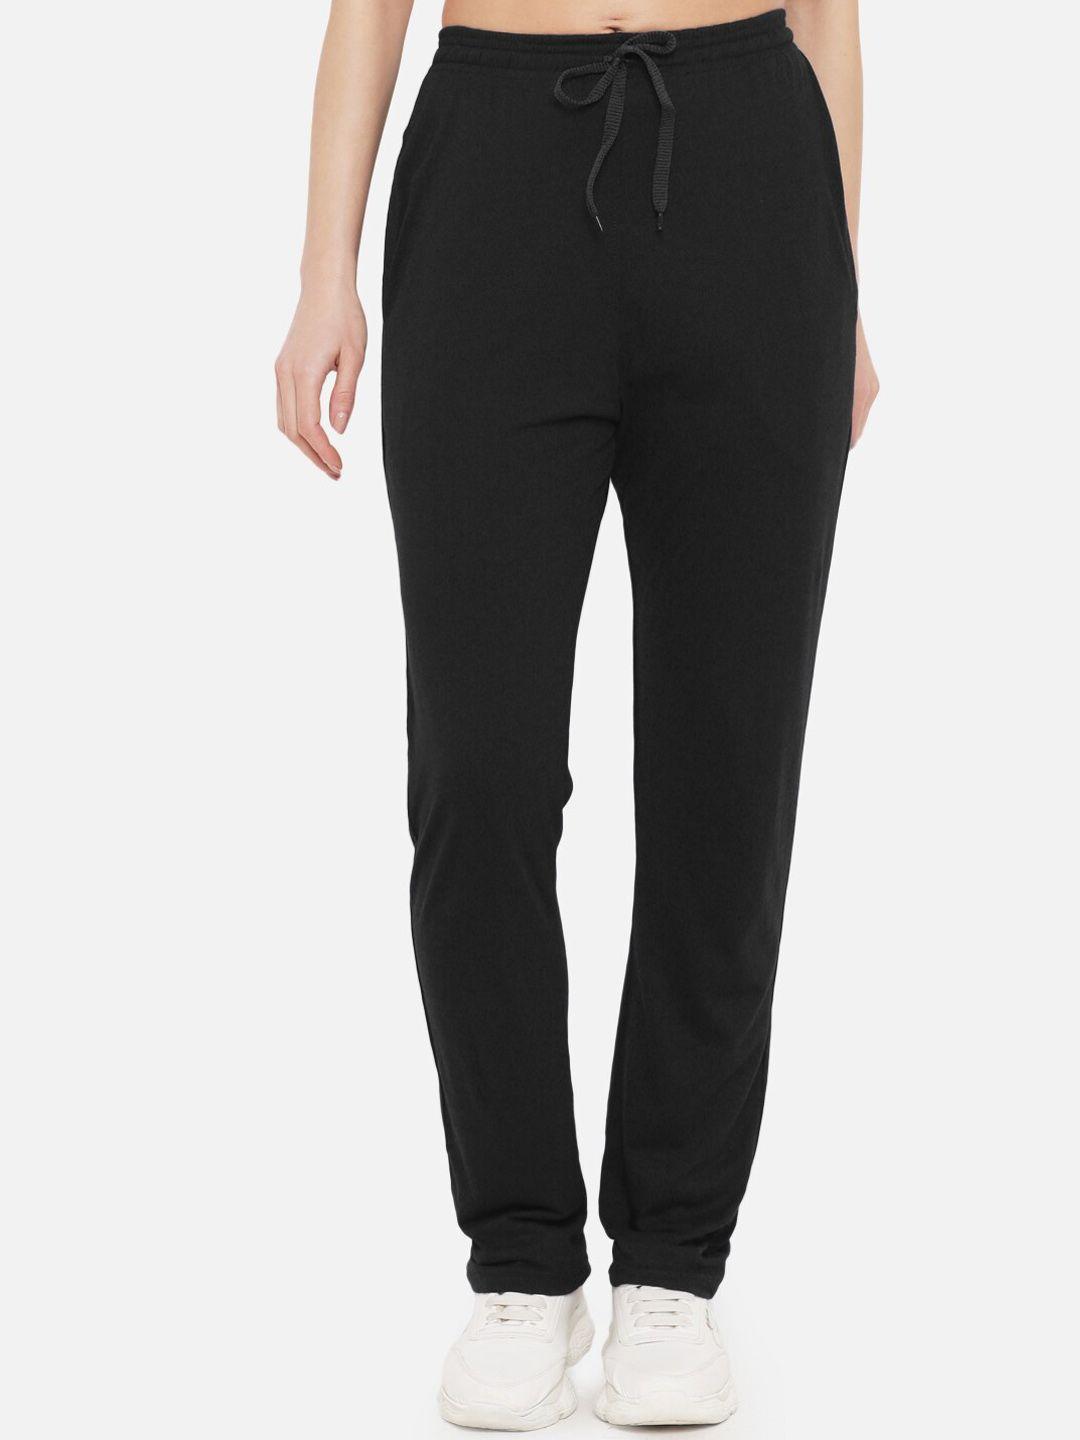 fflirtygo-women-black-solid-relaxed-fit-cotton-track-pants